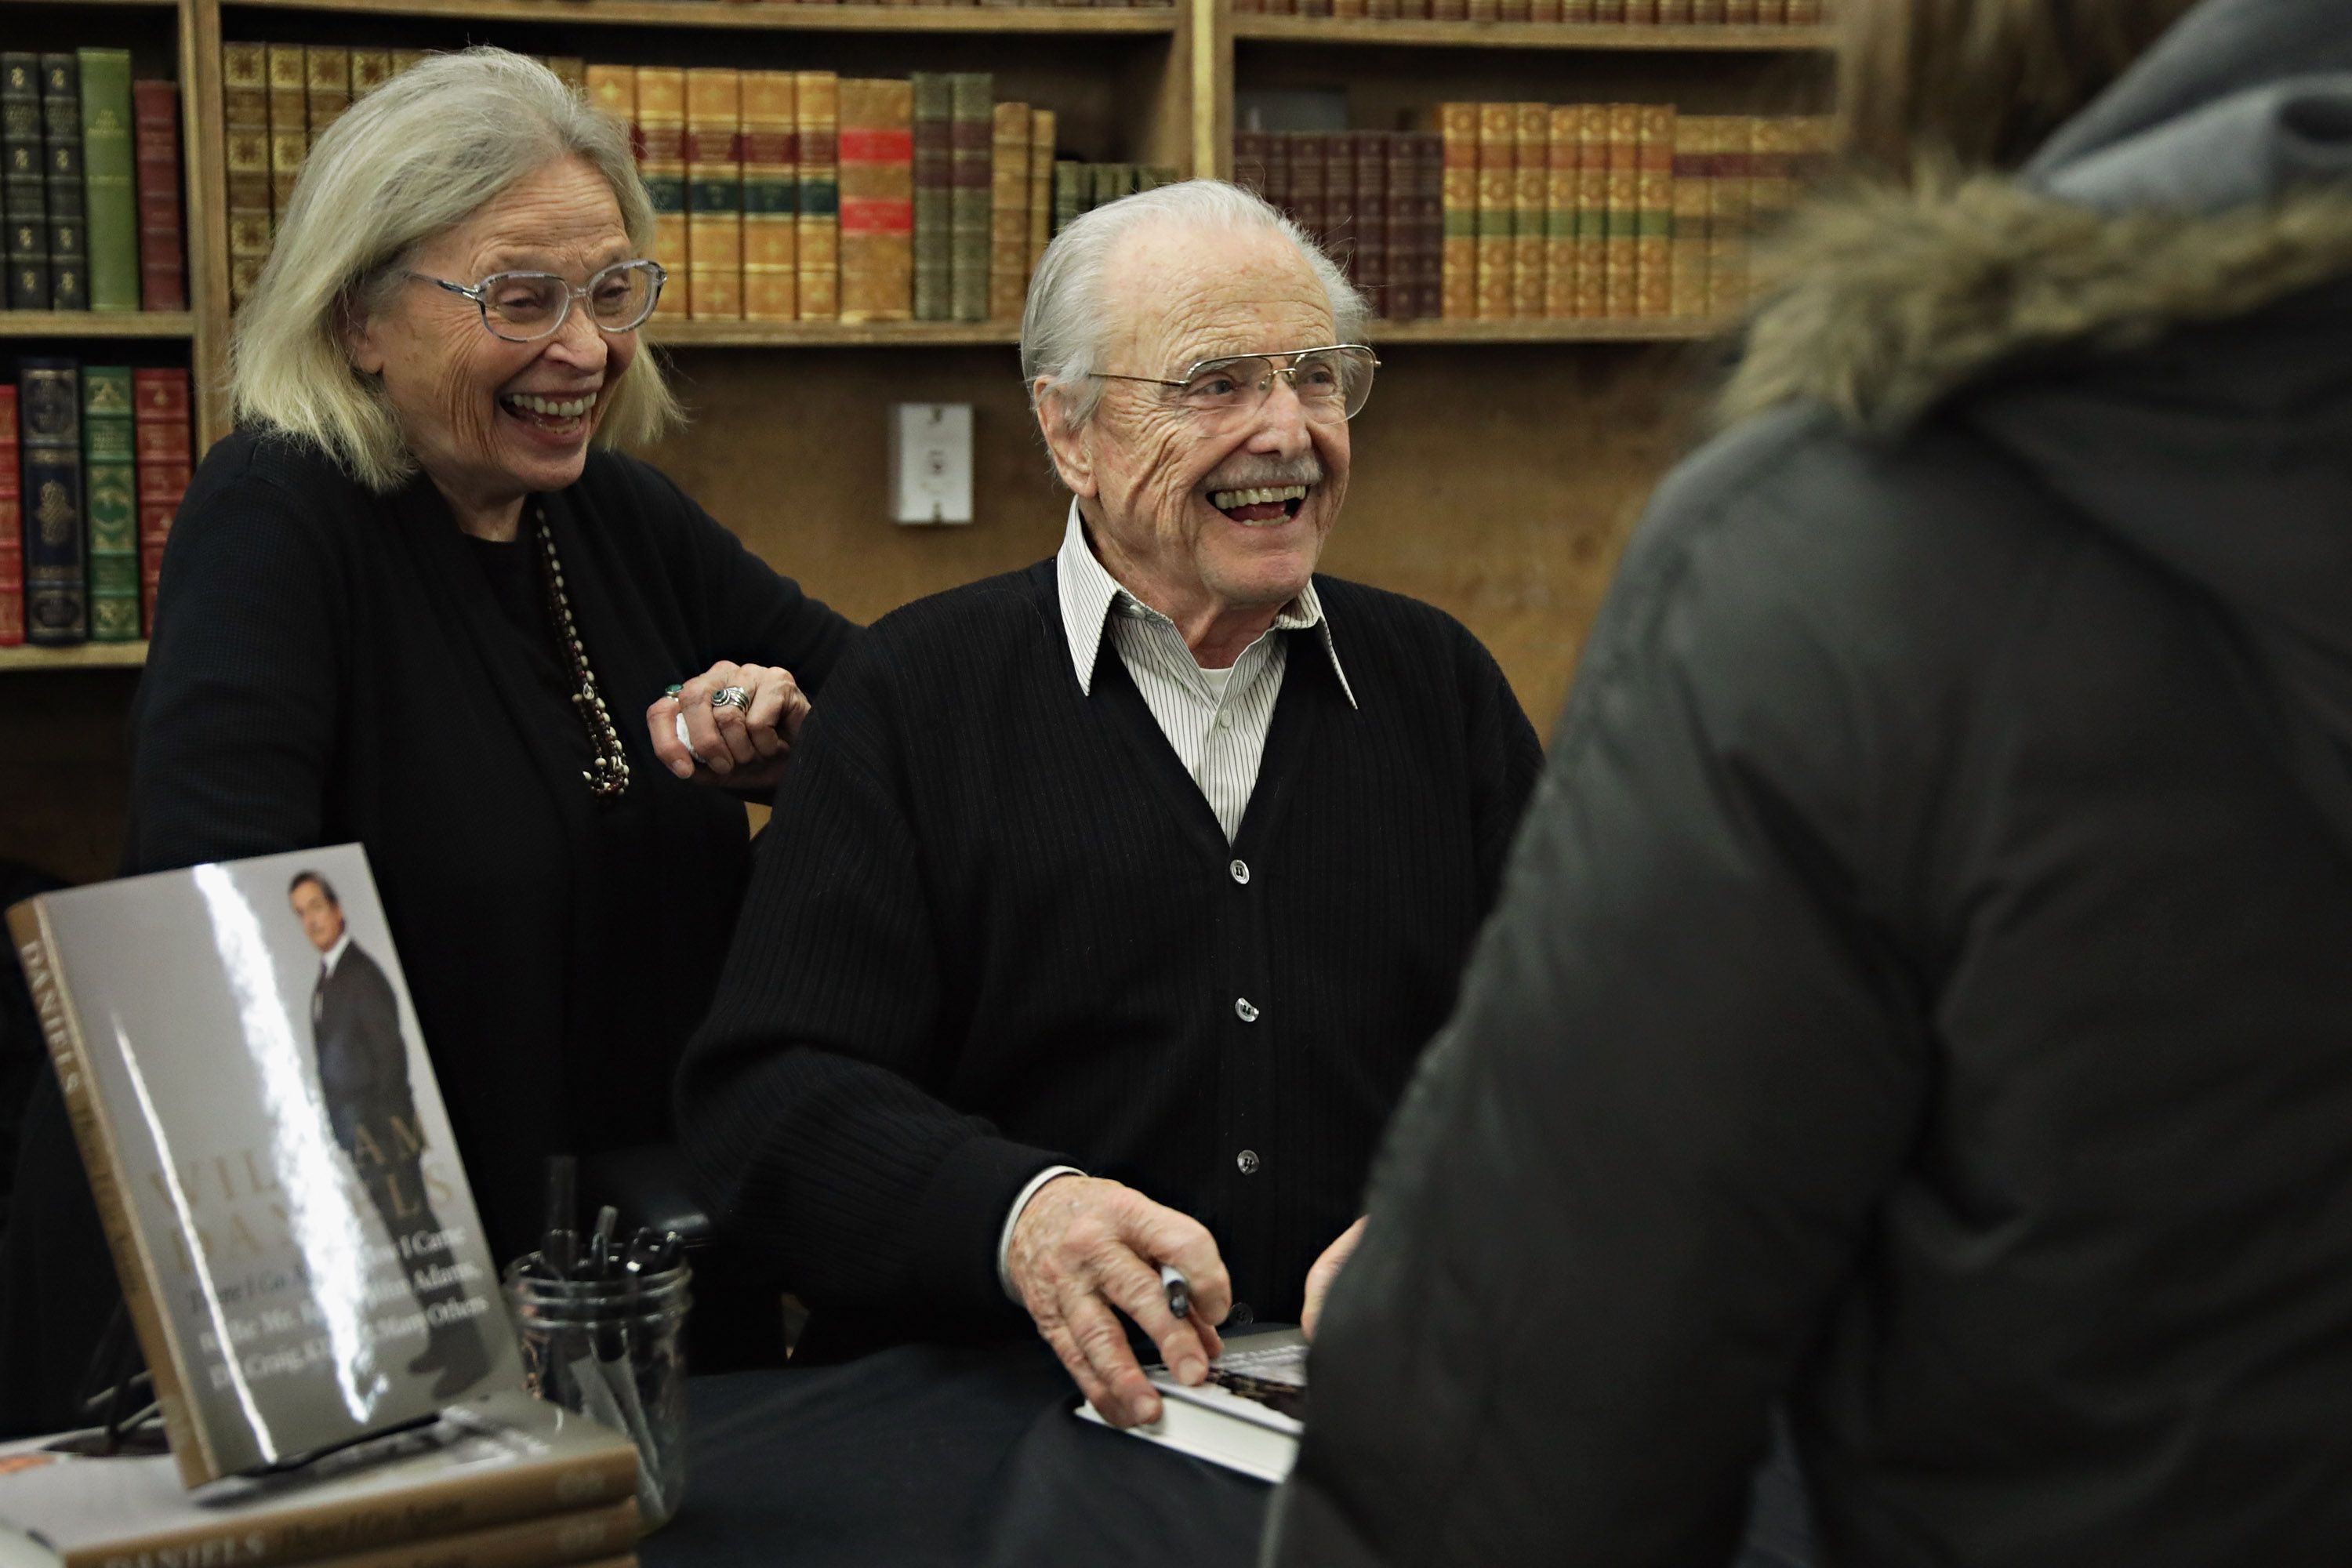 Bonnie Bartlett and William Daniels meet fans as he signs copies of "There I Go Again: How I Came To Be Mr. Feeny, John Adams, Dr. Craig, KITT and Many Others" on March 2, 2017, in New York City | Photo: Cindy Ord/Getty Images